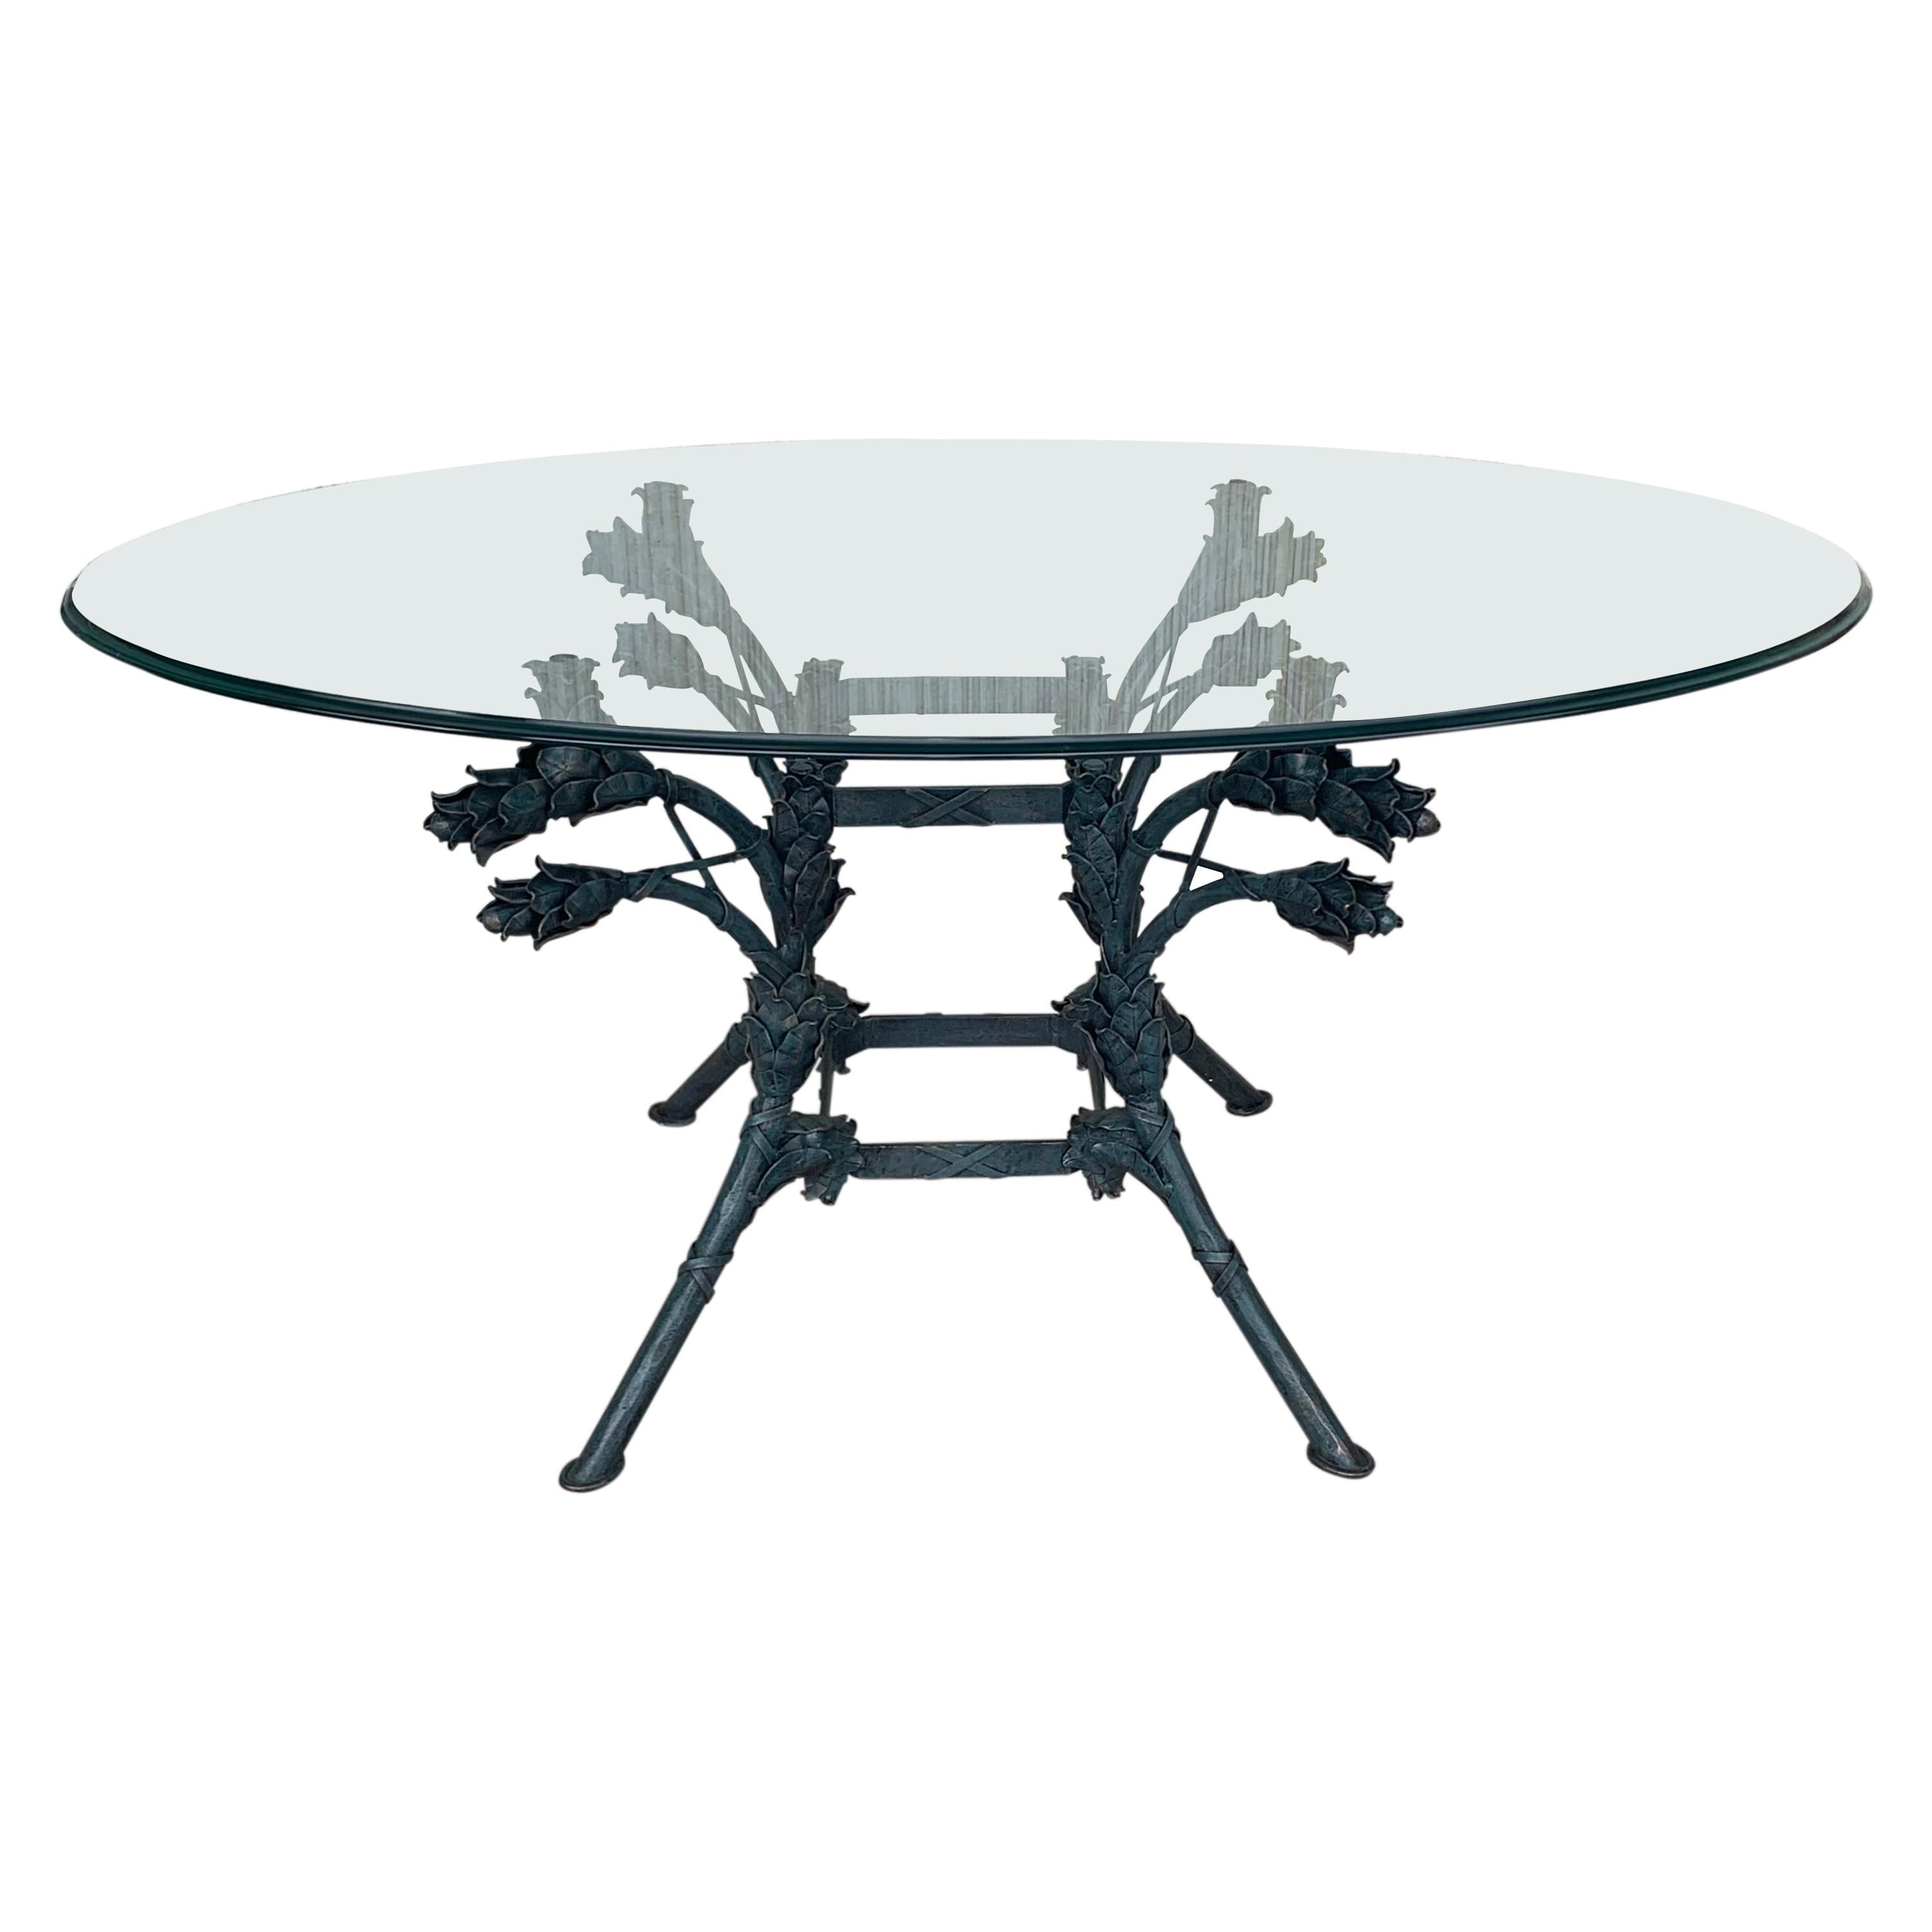 Italian Neoclassical Ornamental Wrought Iron Center Table with Oval Glass Top